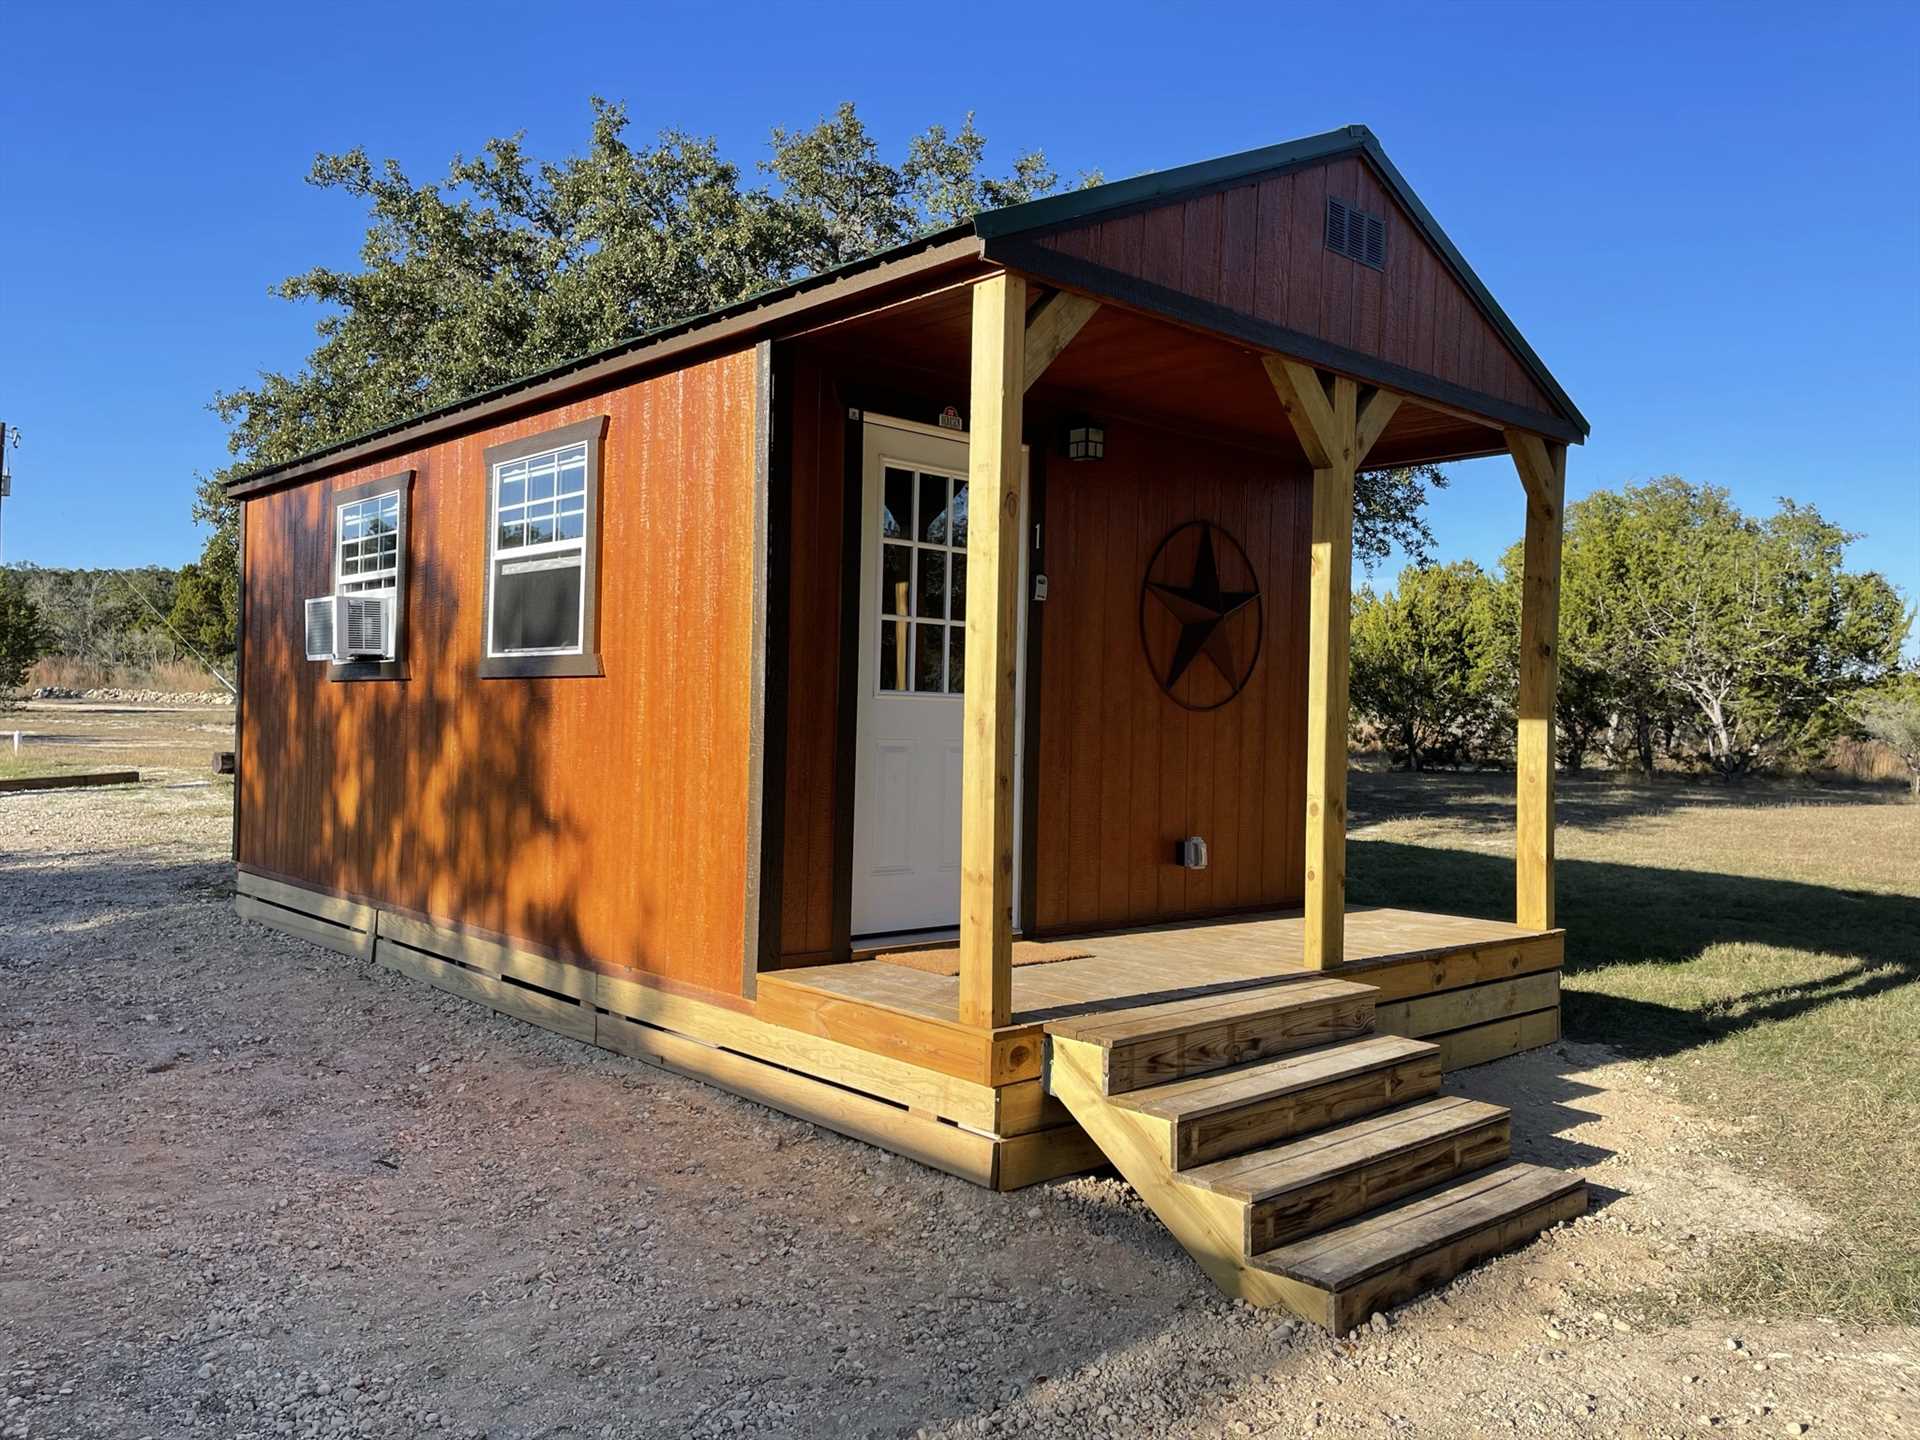                                                 The Great Heart Ranch Cabin #1 is the perfect size for a cozy and wonderful Hill Country escape for two!